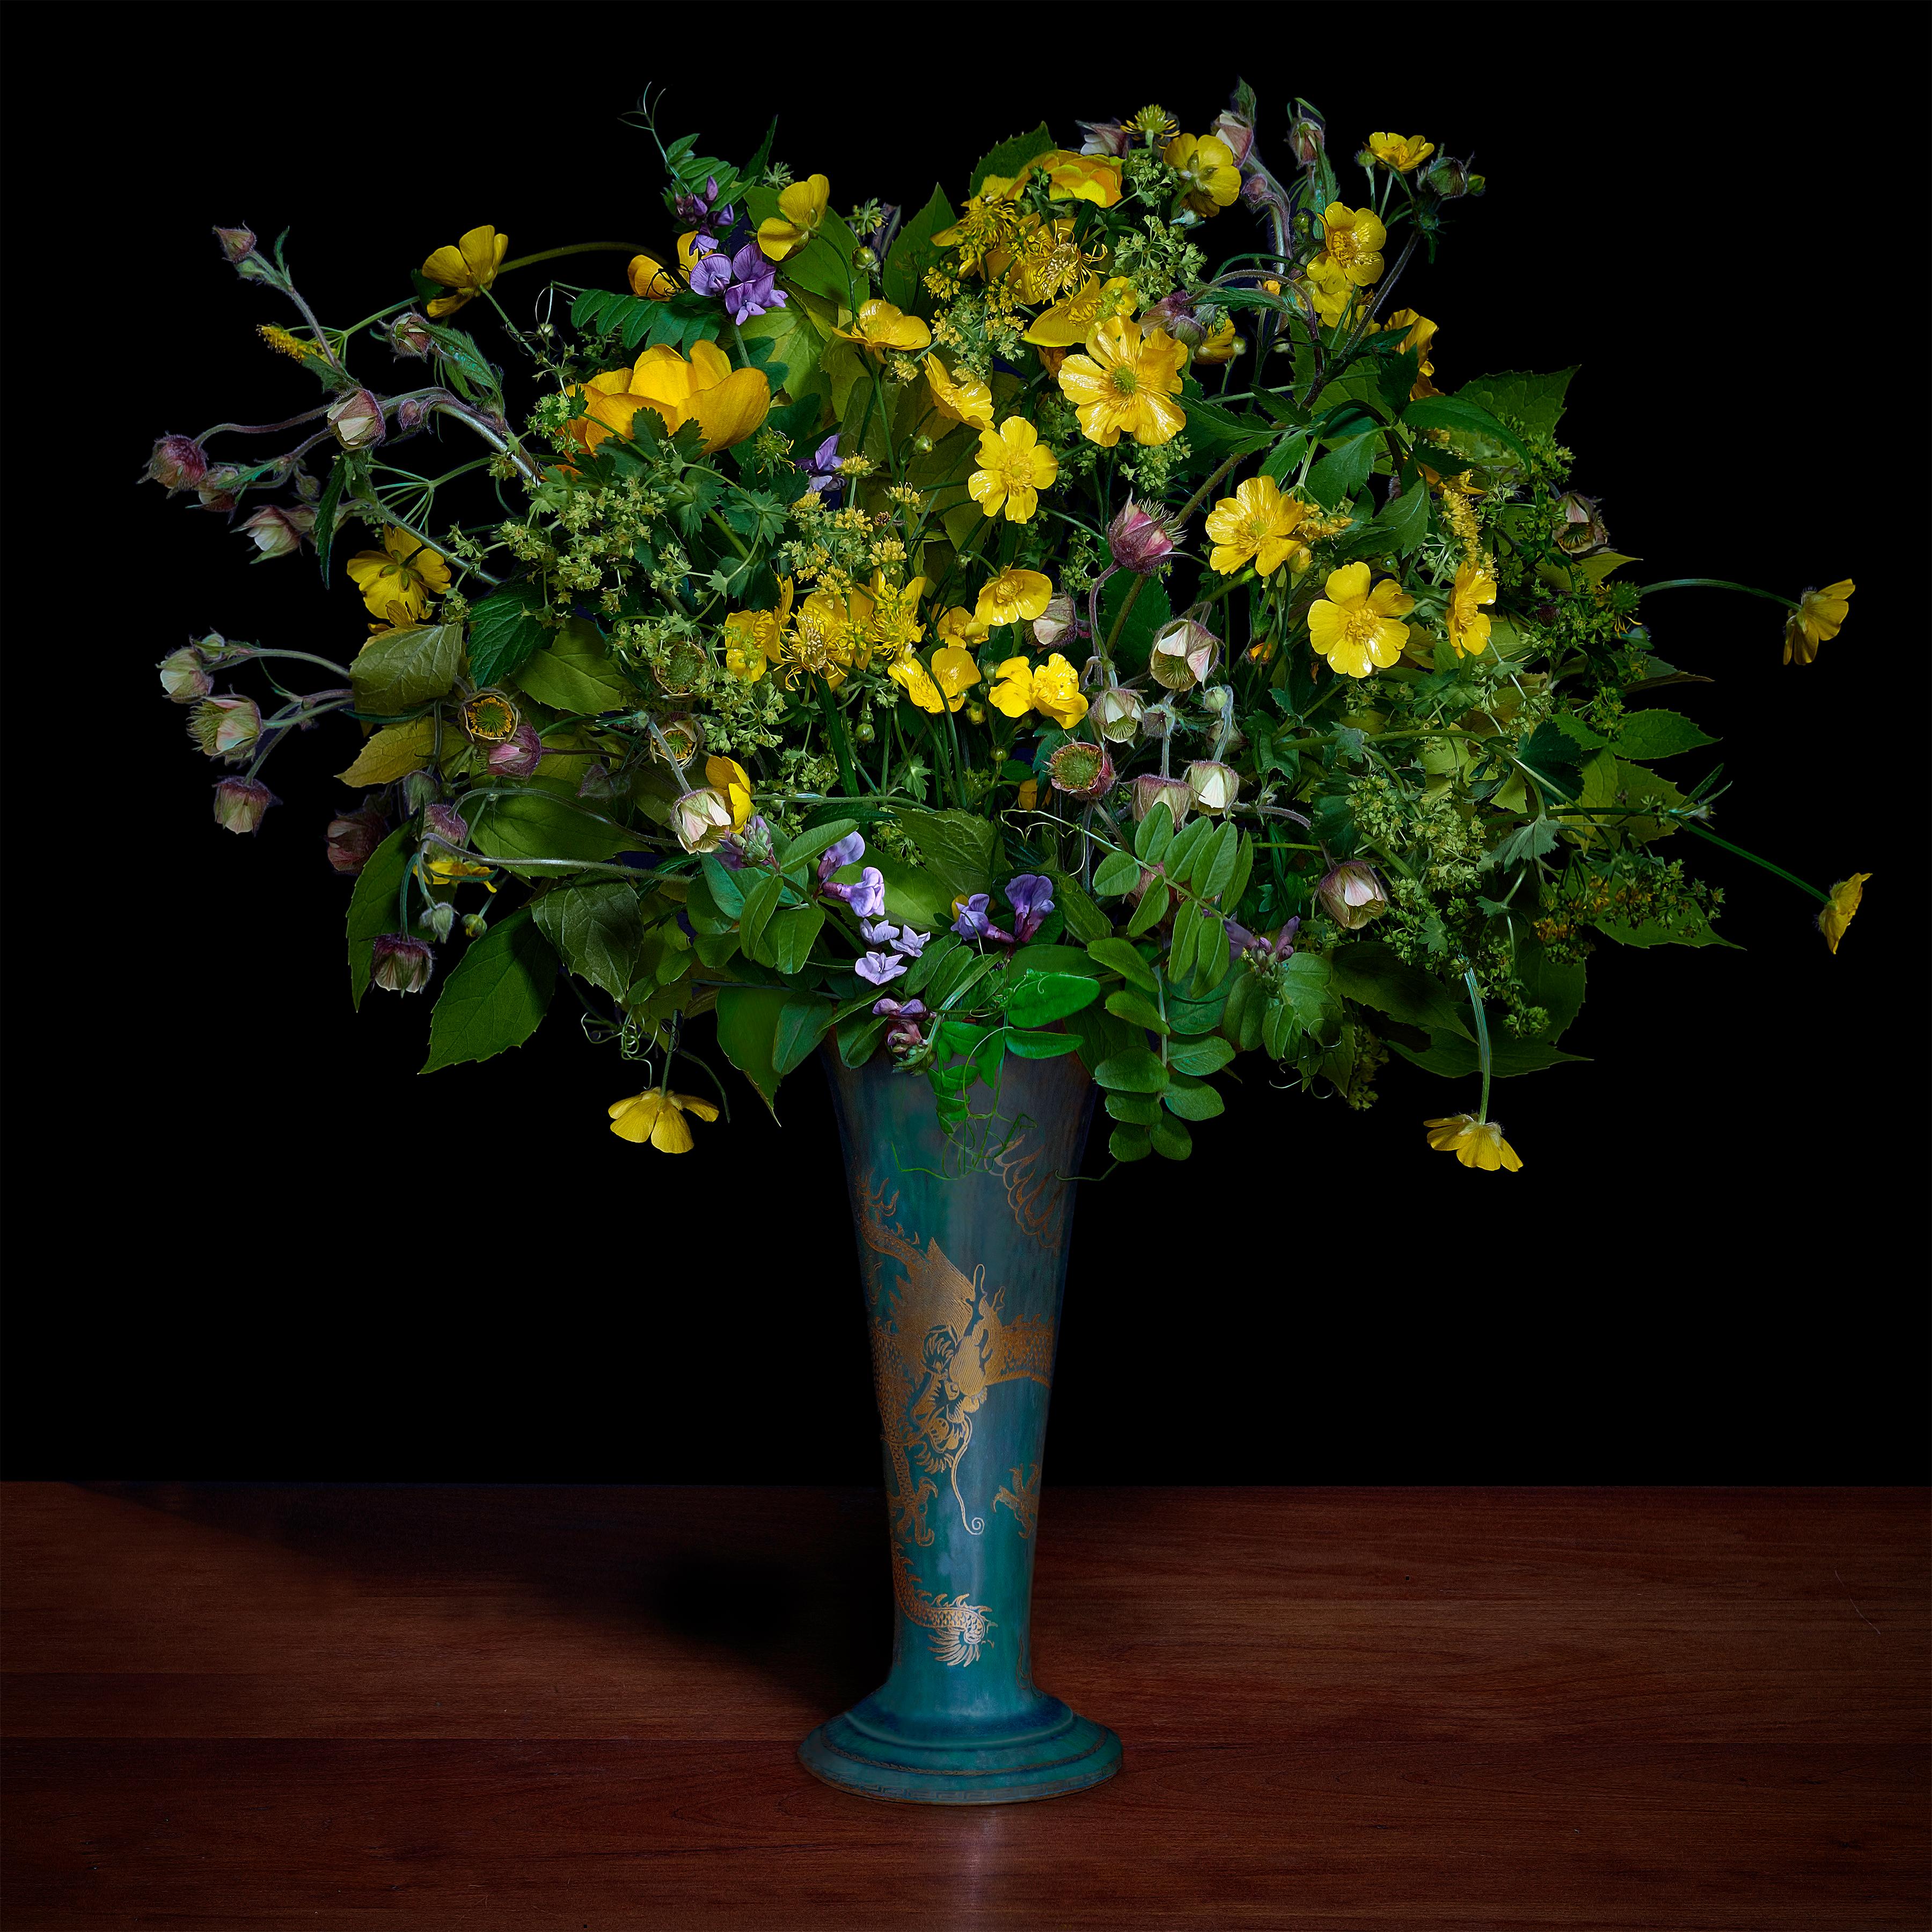 T.M. Glass Color Photograph - Buttercups and Other Wildflowers in a Japanese Vase